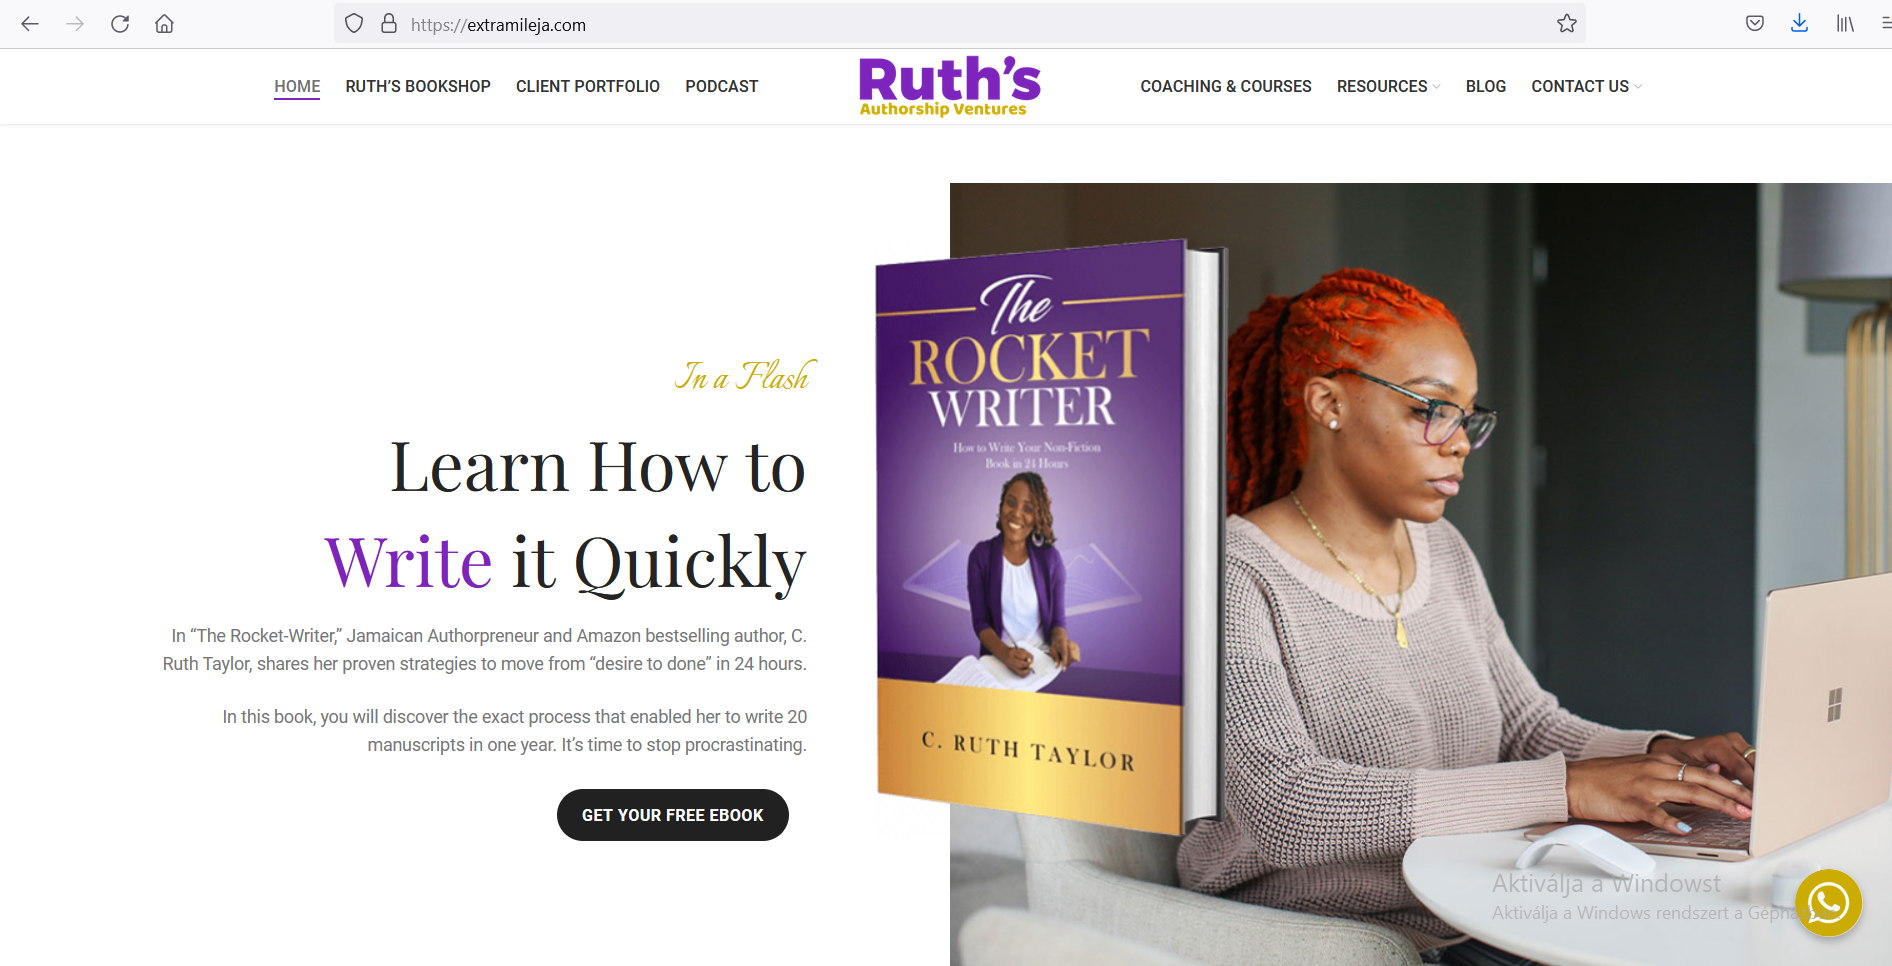 Authorpreneurship as a Platform for Transformation by Cameka “Ruth” Taylor